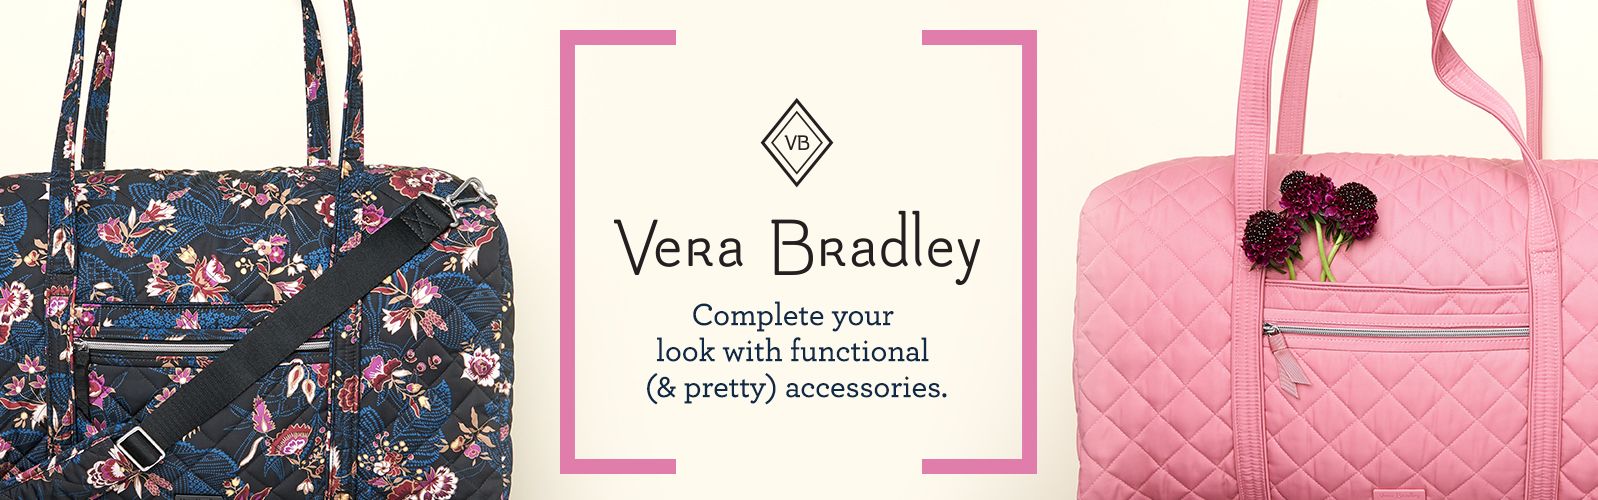 Vera Bradley. Complete your look with functional (& pretty) accessories.